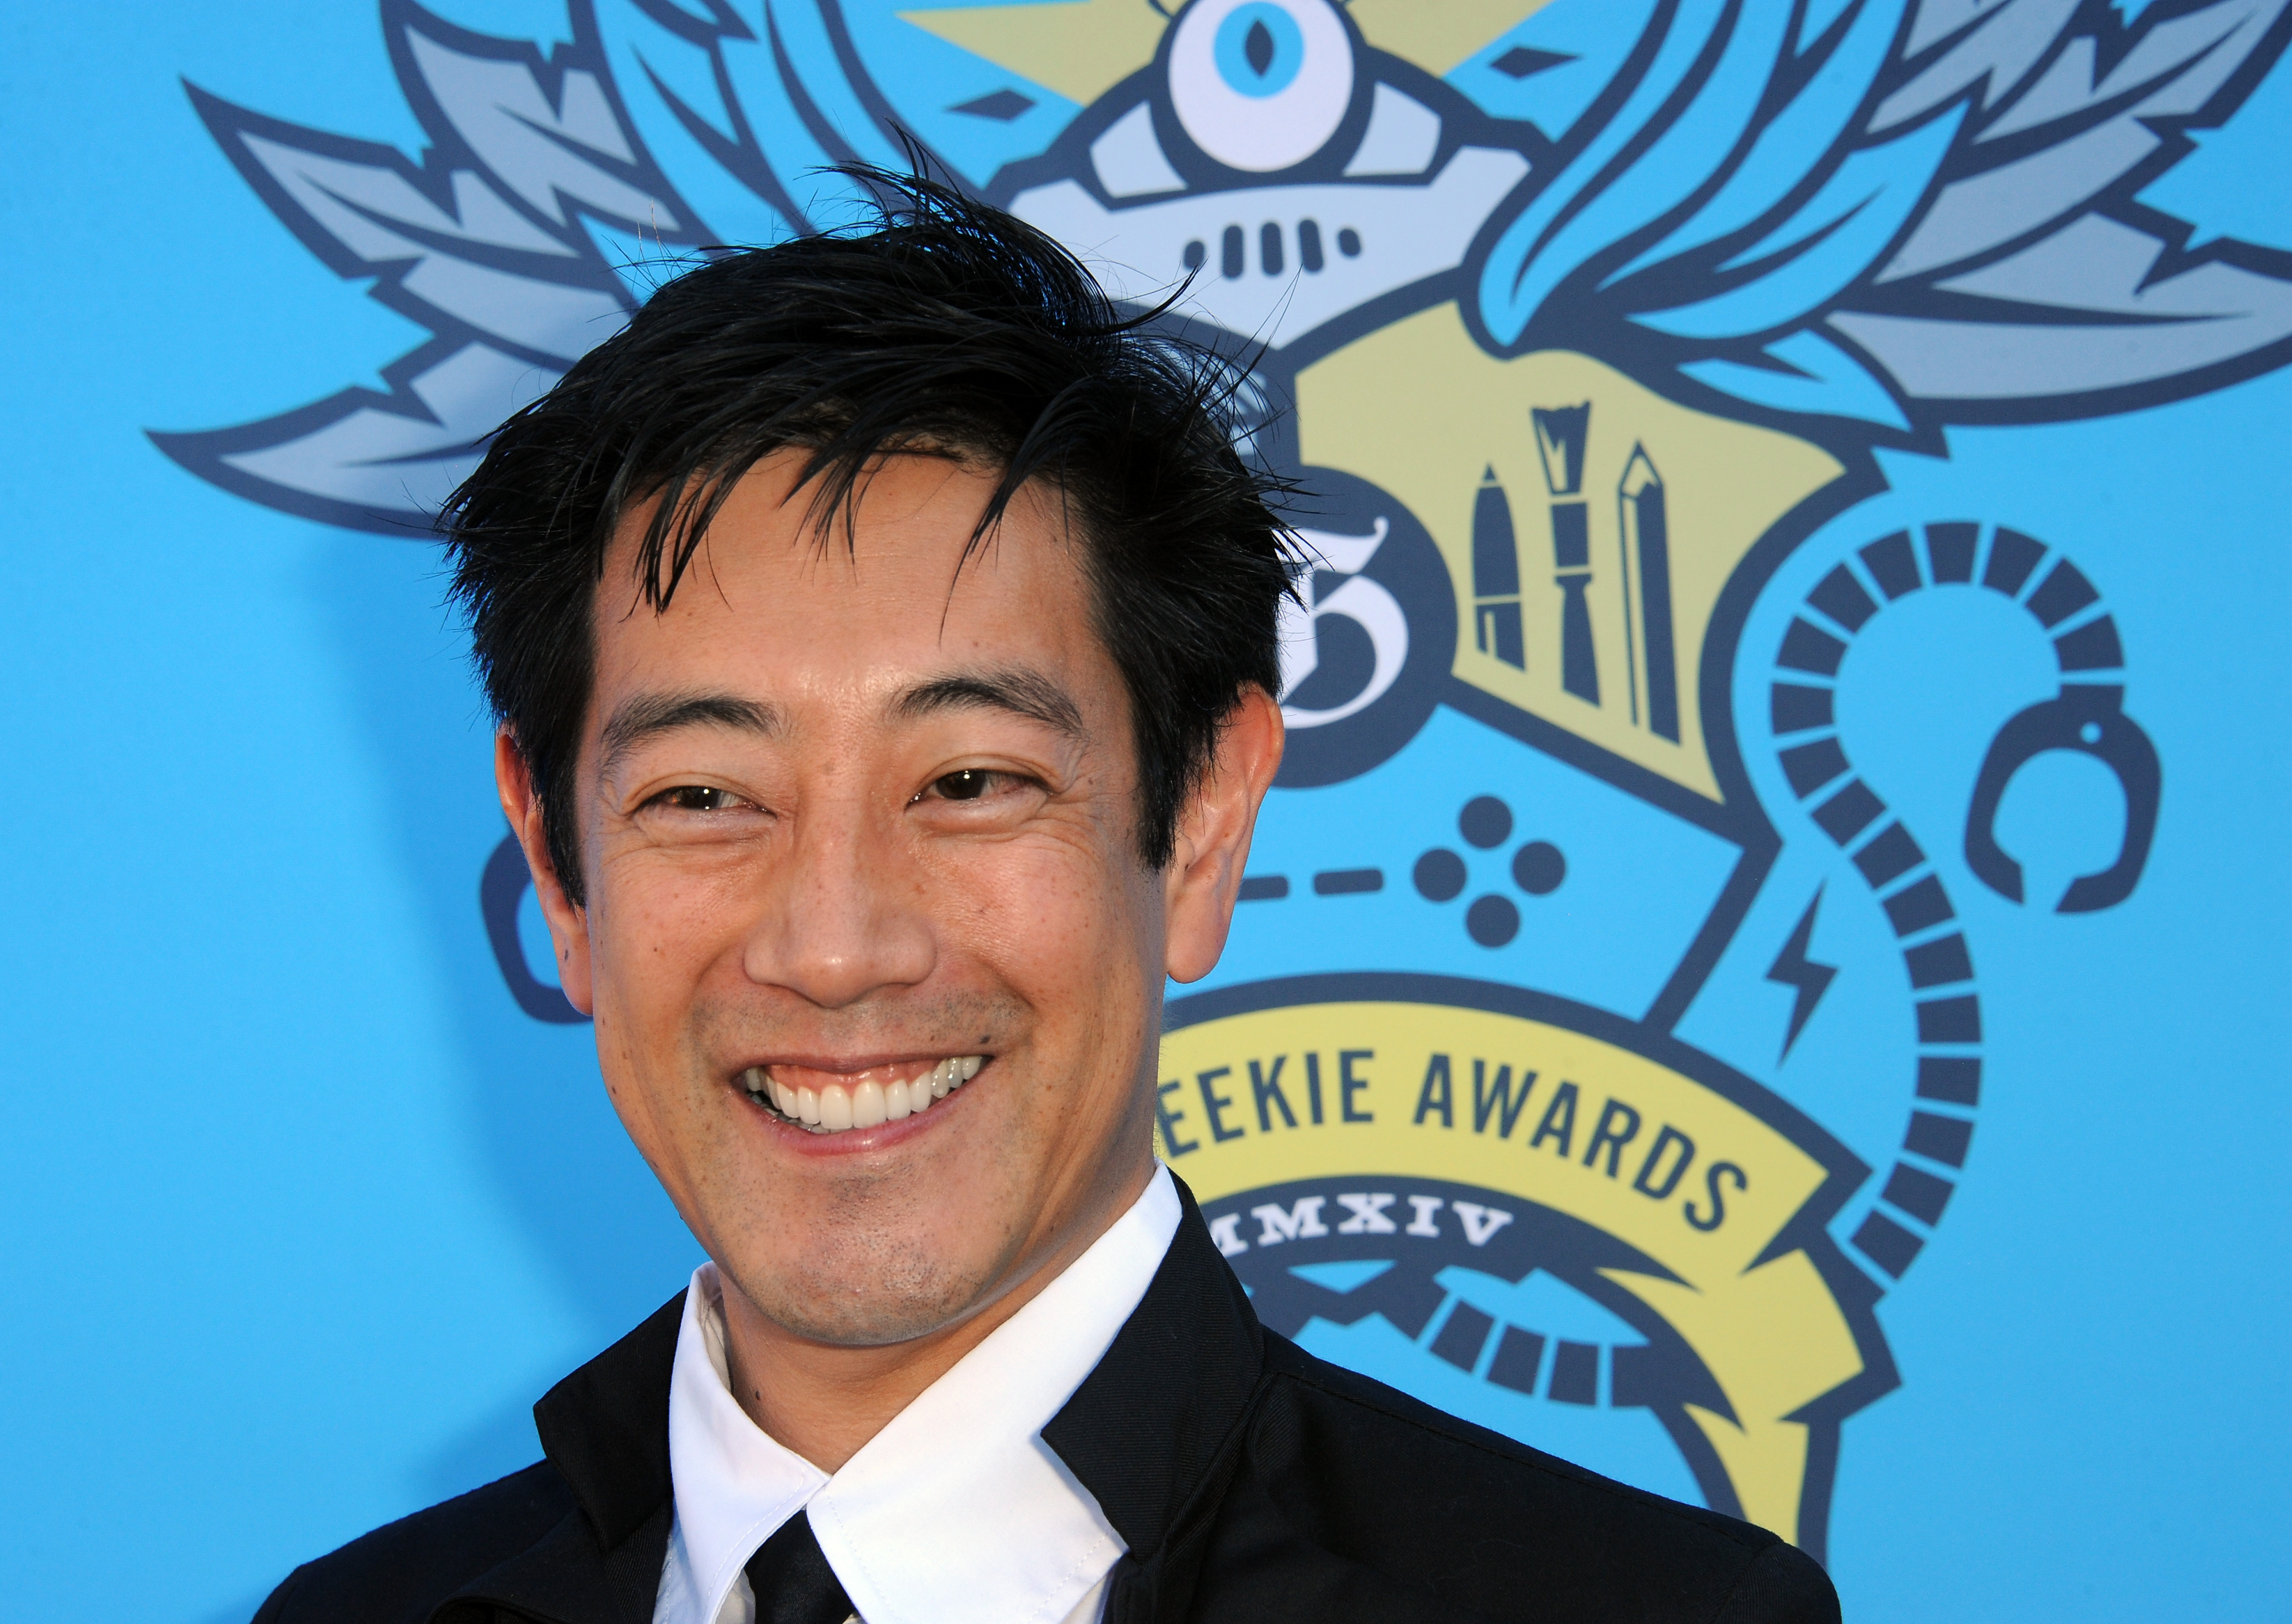  Grant Imahara arrives for The Geekie Awards 2014 held at Avalon on August 17, 2014 in Hollywood, California.  (Photo by Albert L. Ortega/Getty Images)